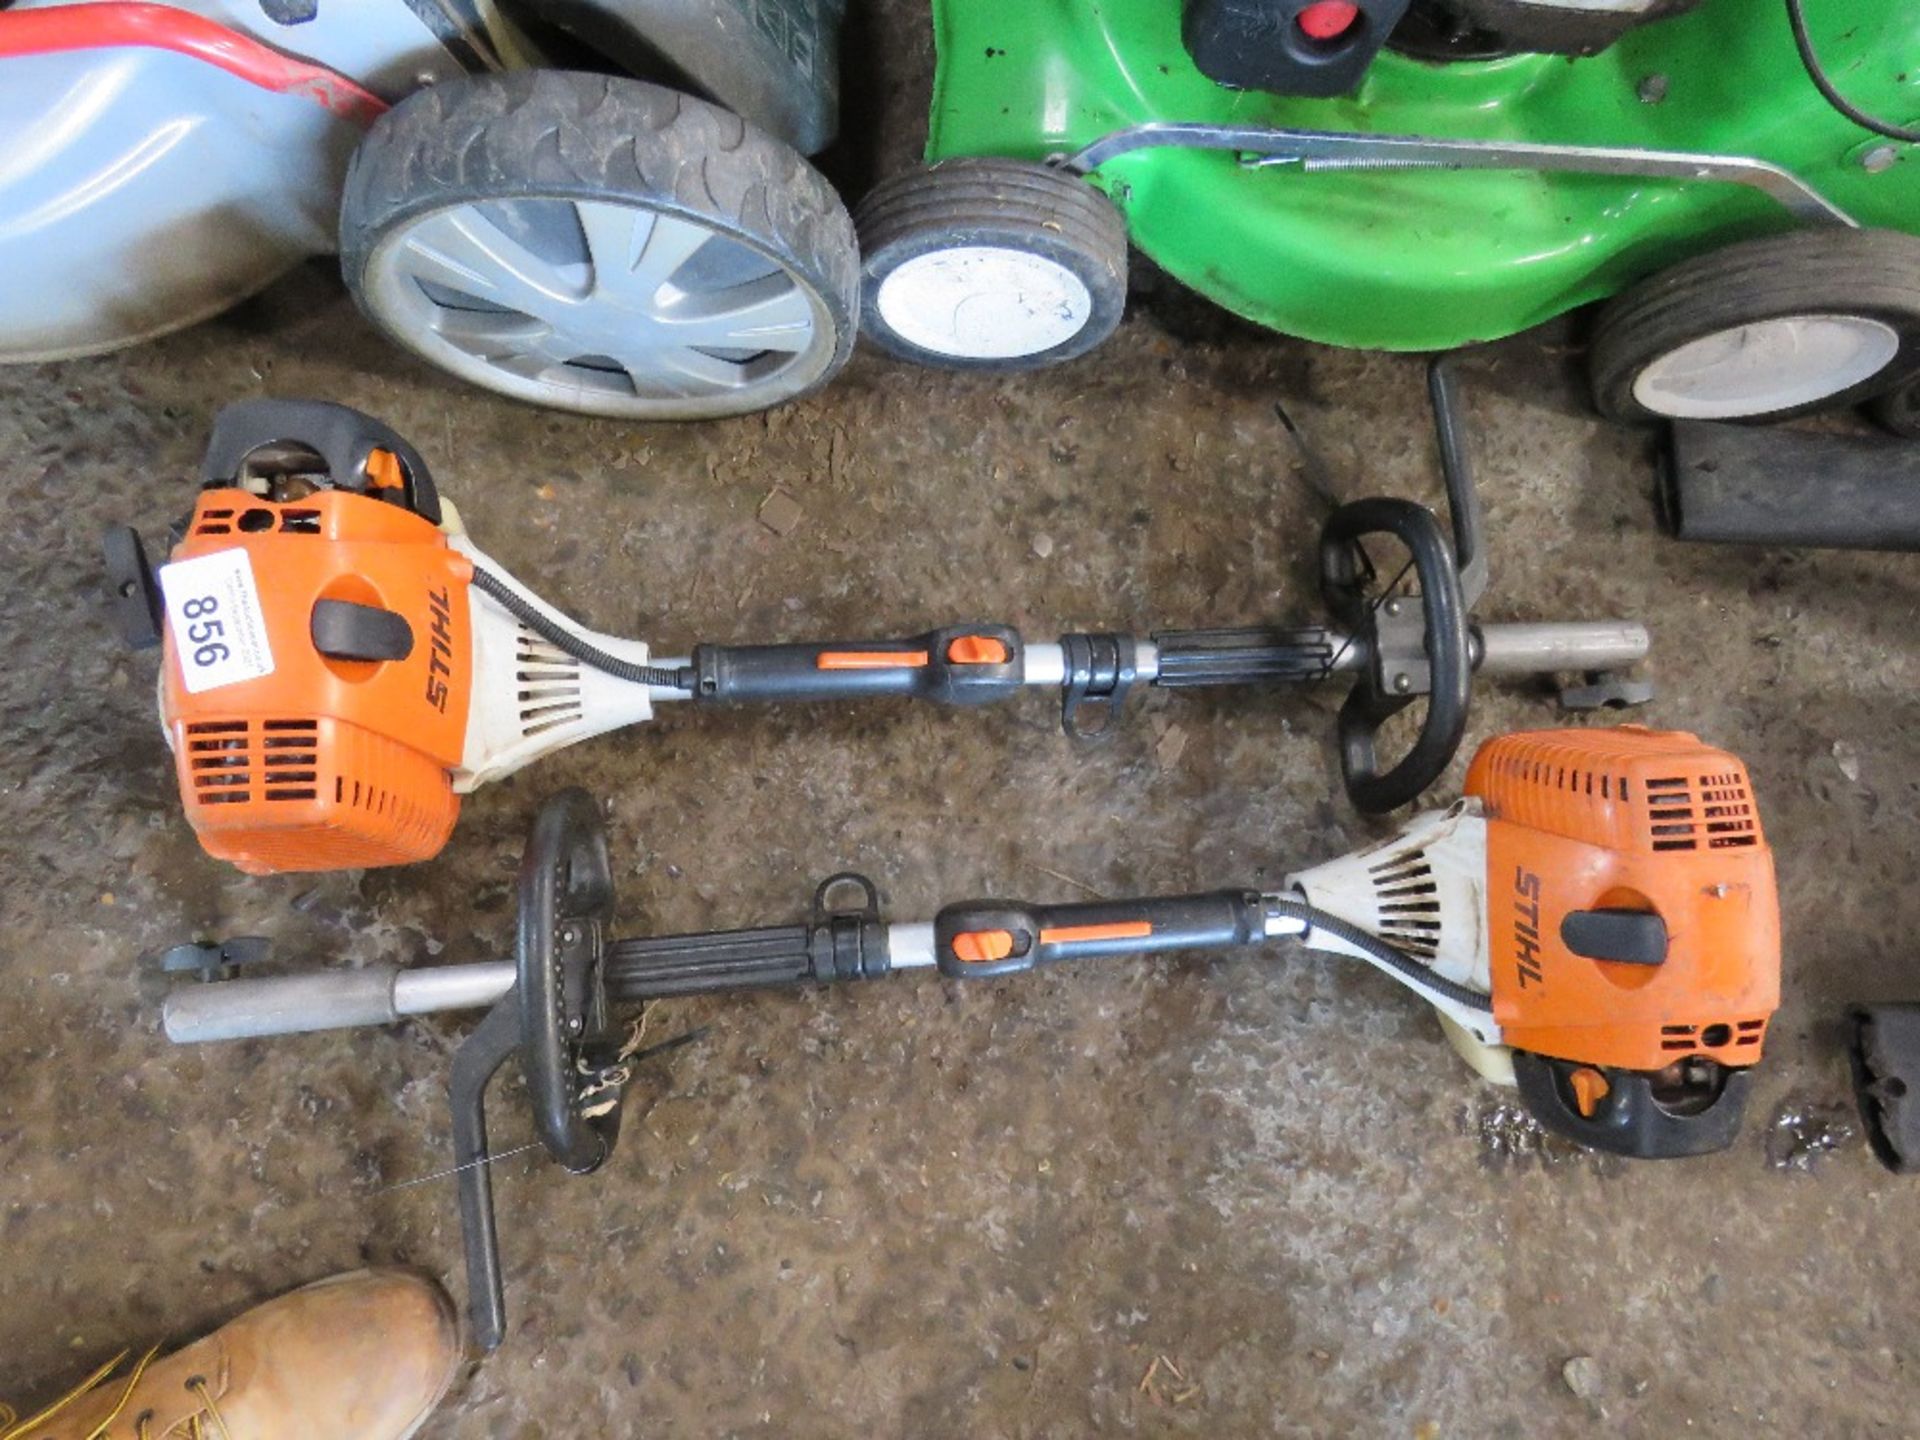 2 X STIHL MULTI TOOL POWER HEADS. UNTESTED, CONDITION UNKNOWN. NO VAT ON HAMMER PRICE.